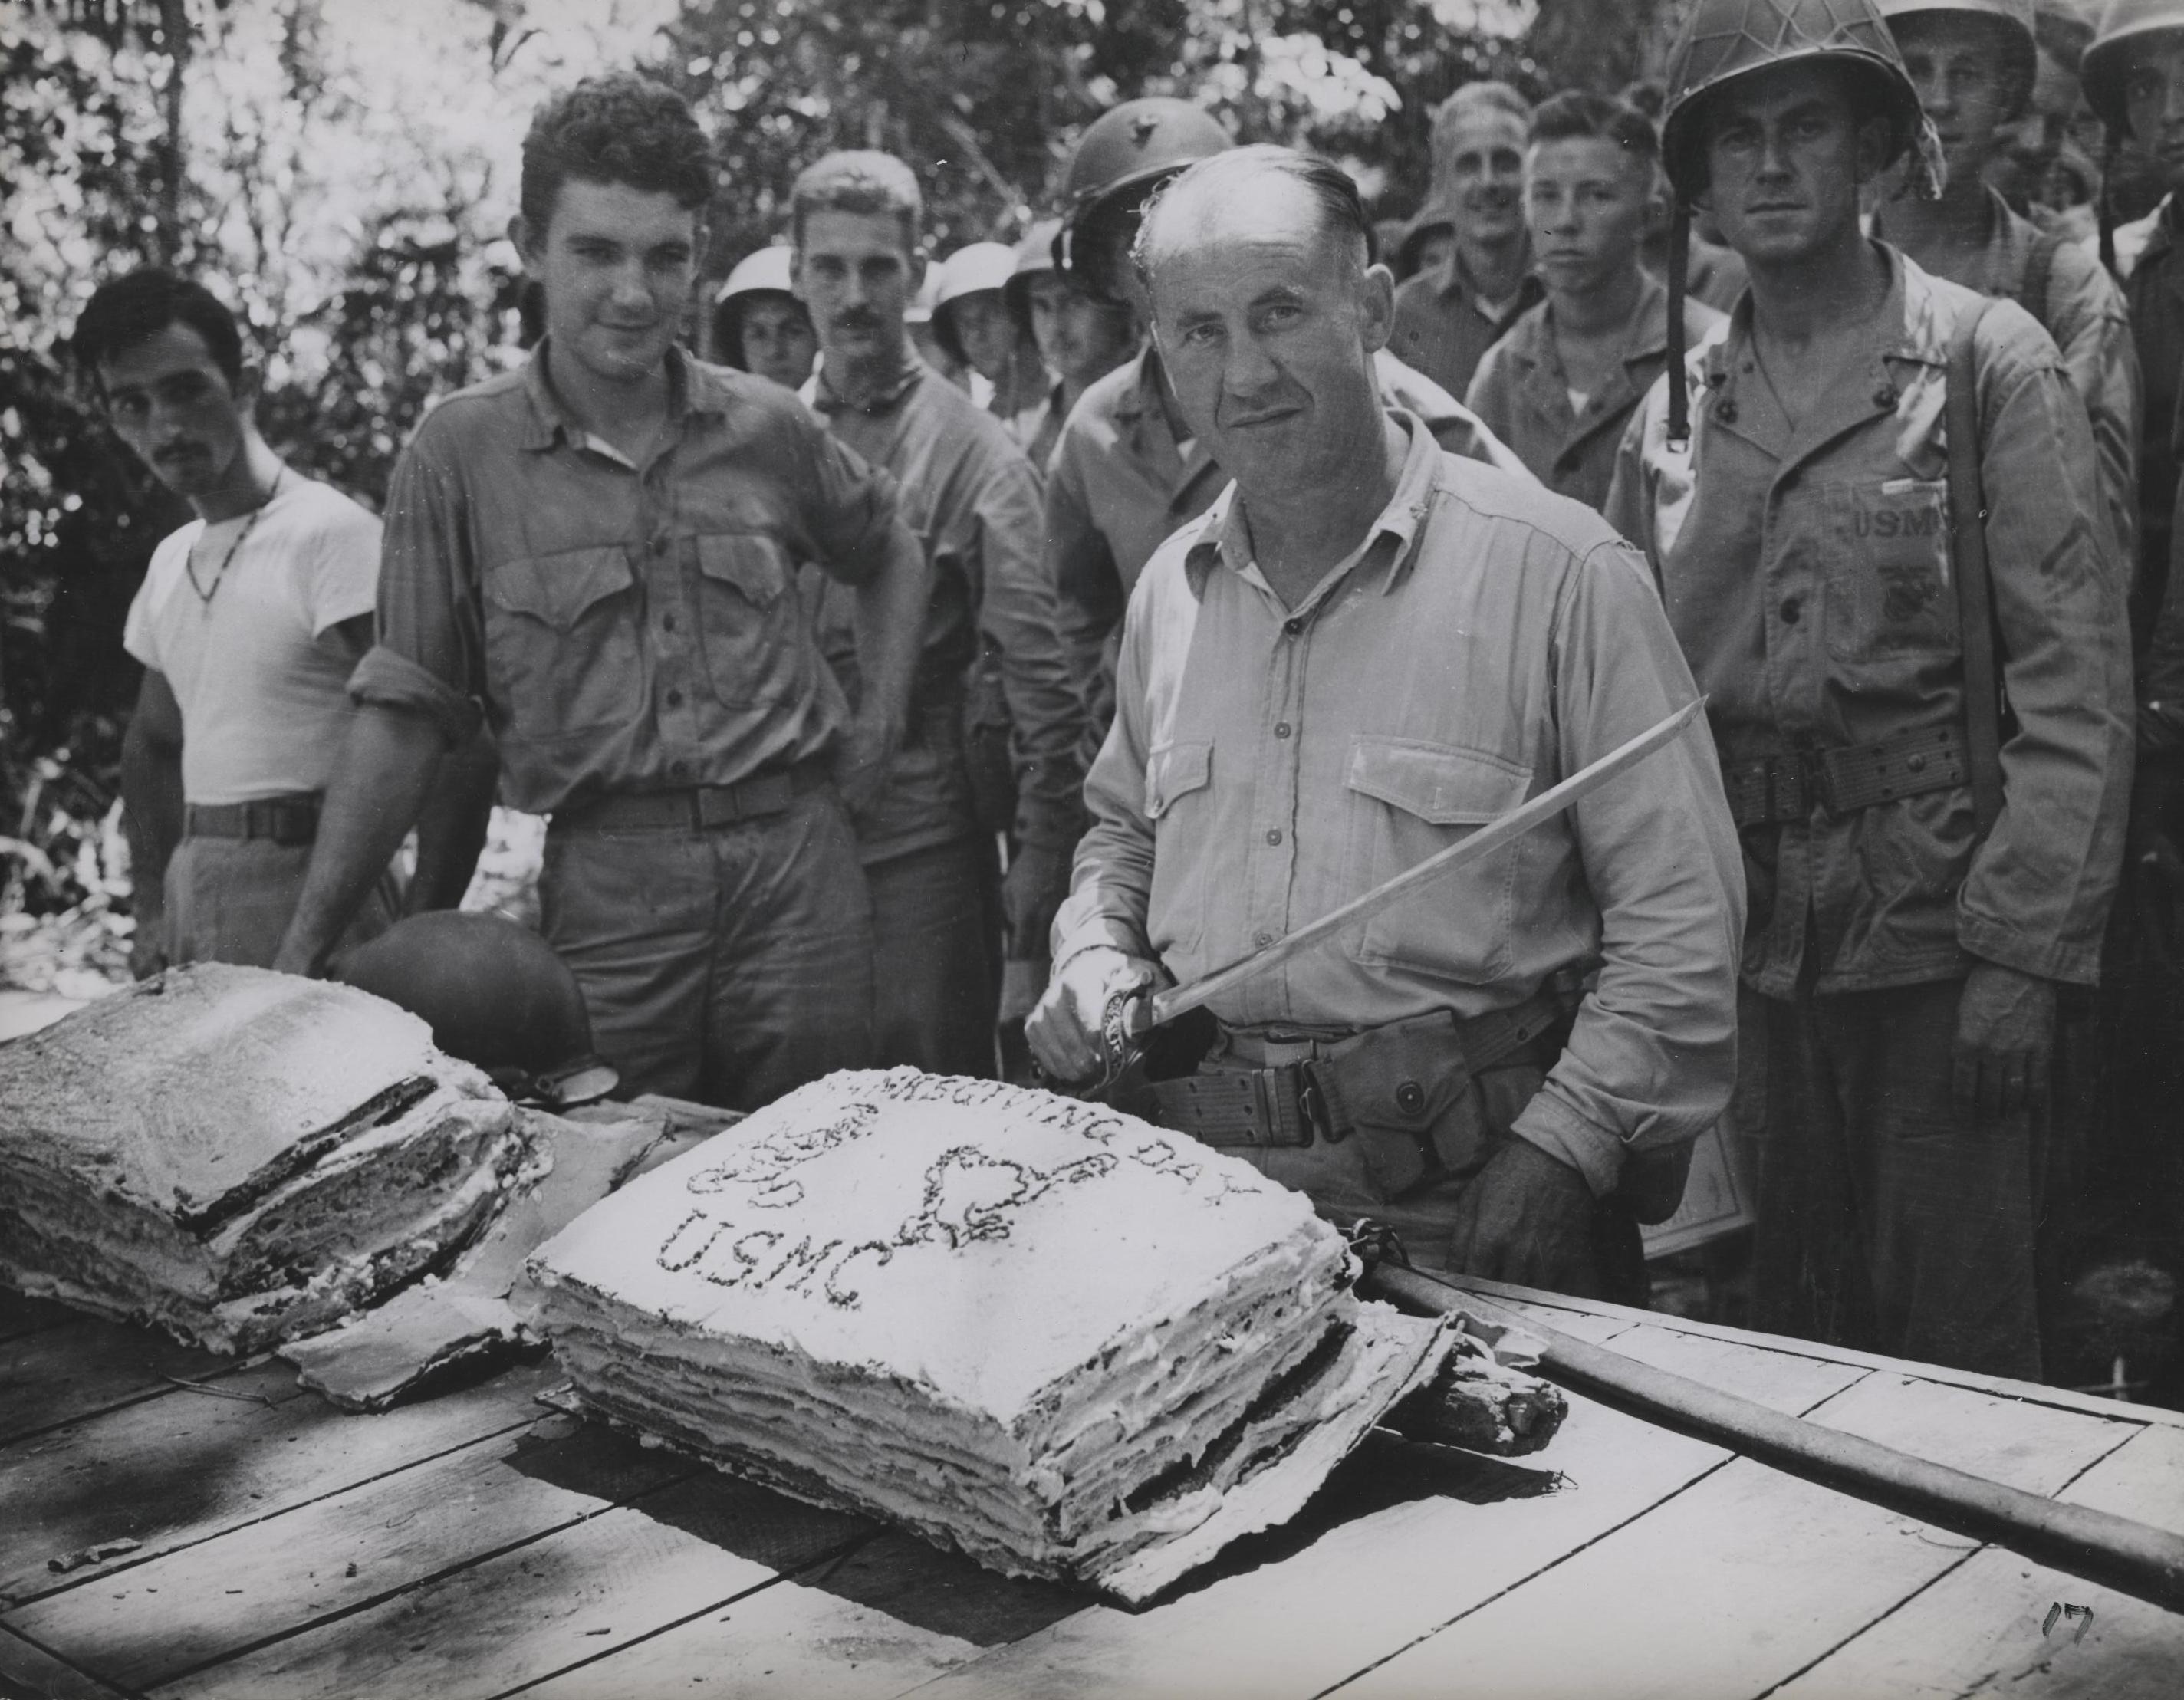 USMC Lt. Col. W.W. Stickney preparing to cut a Thanksgiving cake with a captured Japanese sword, Guadalcanal, 26 Nov 1942 (US Marine Corps photo)